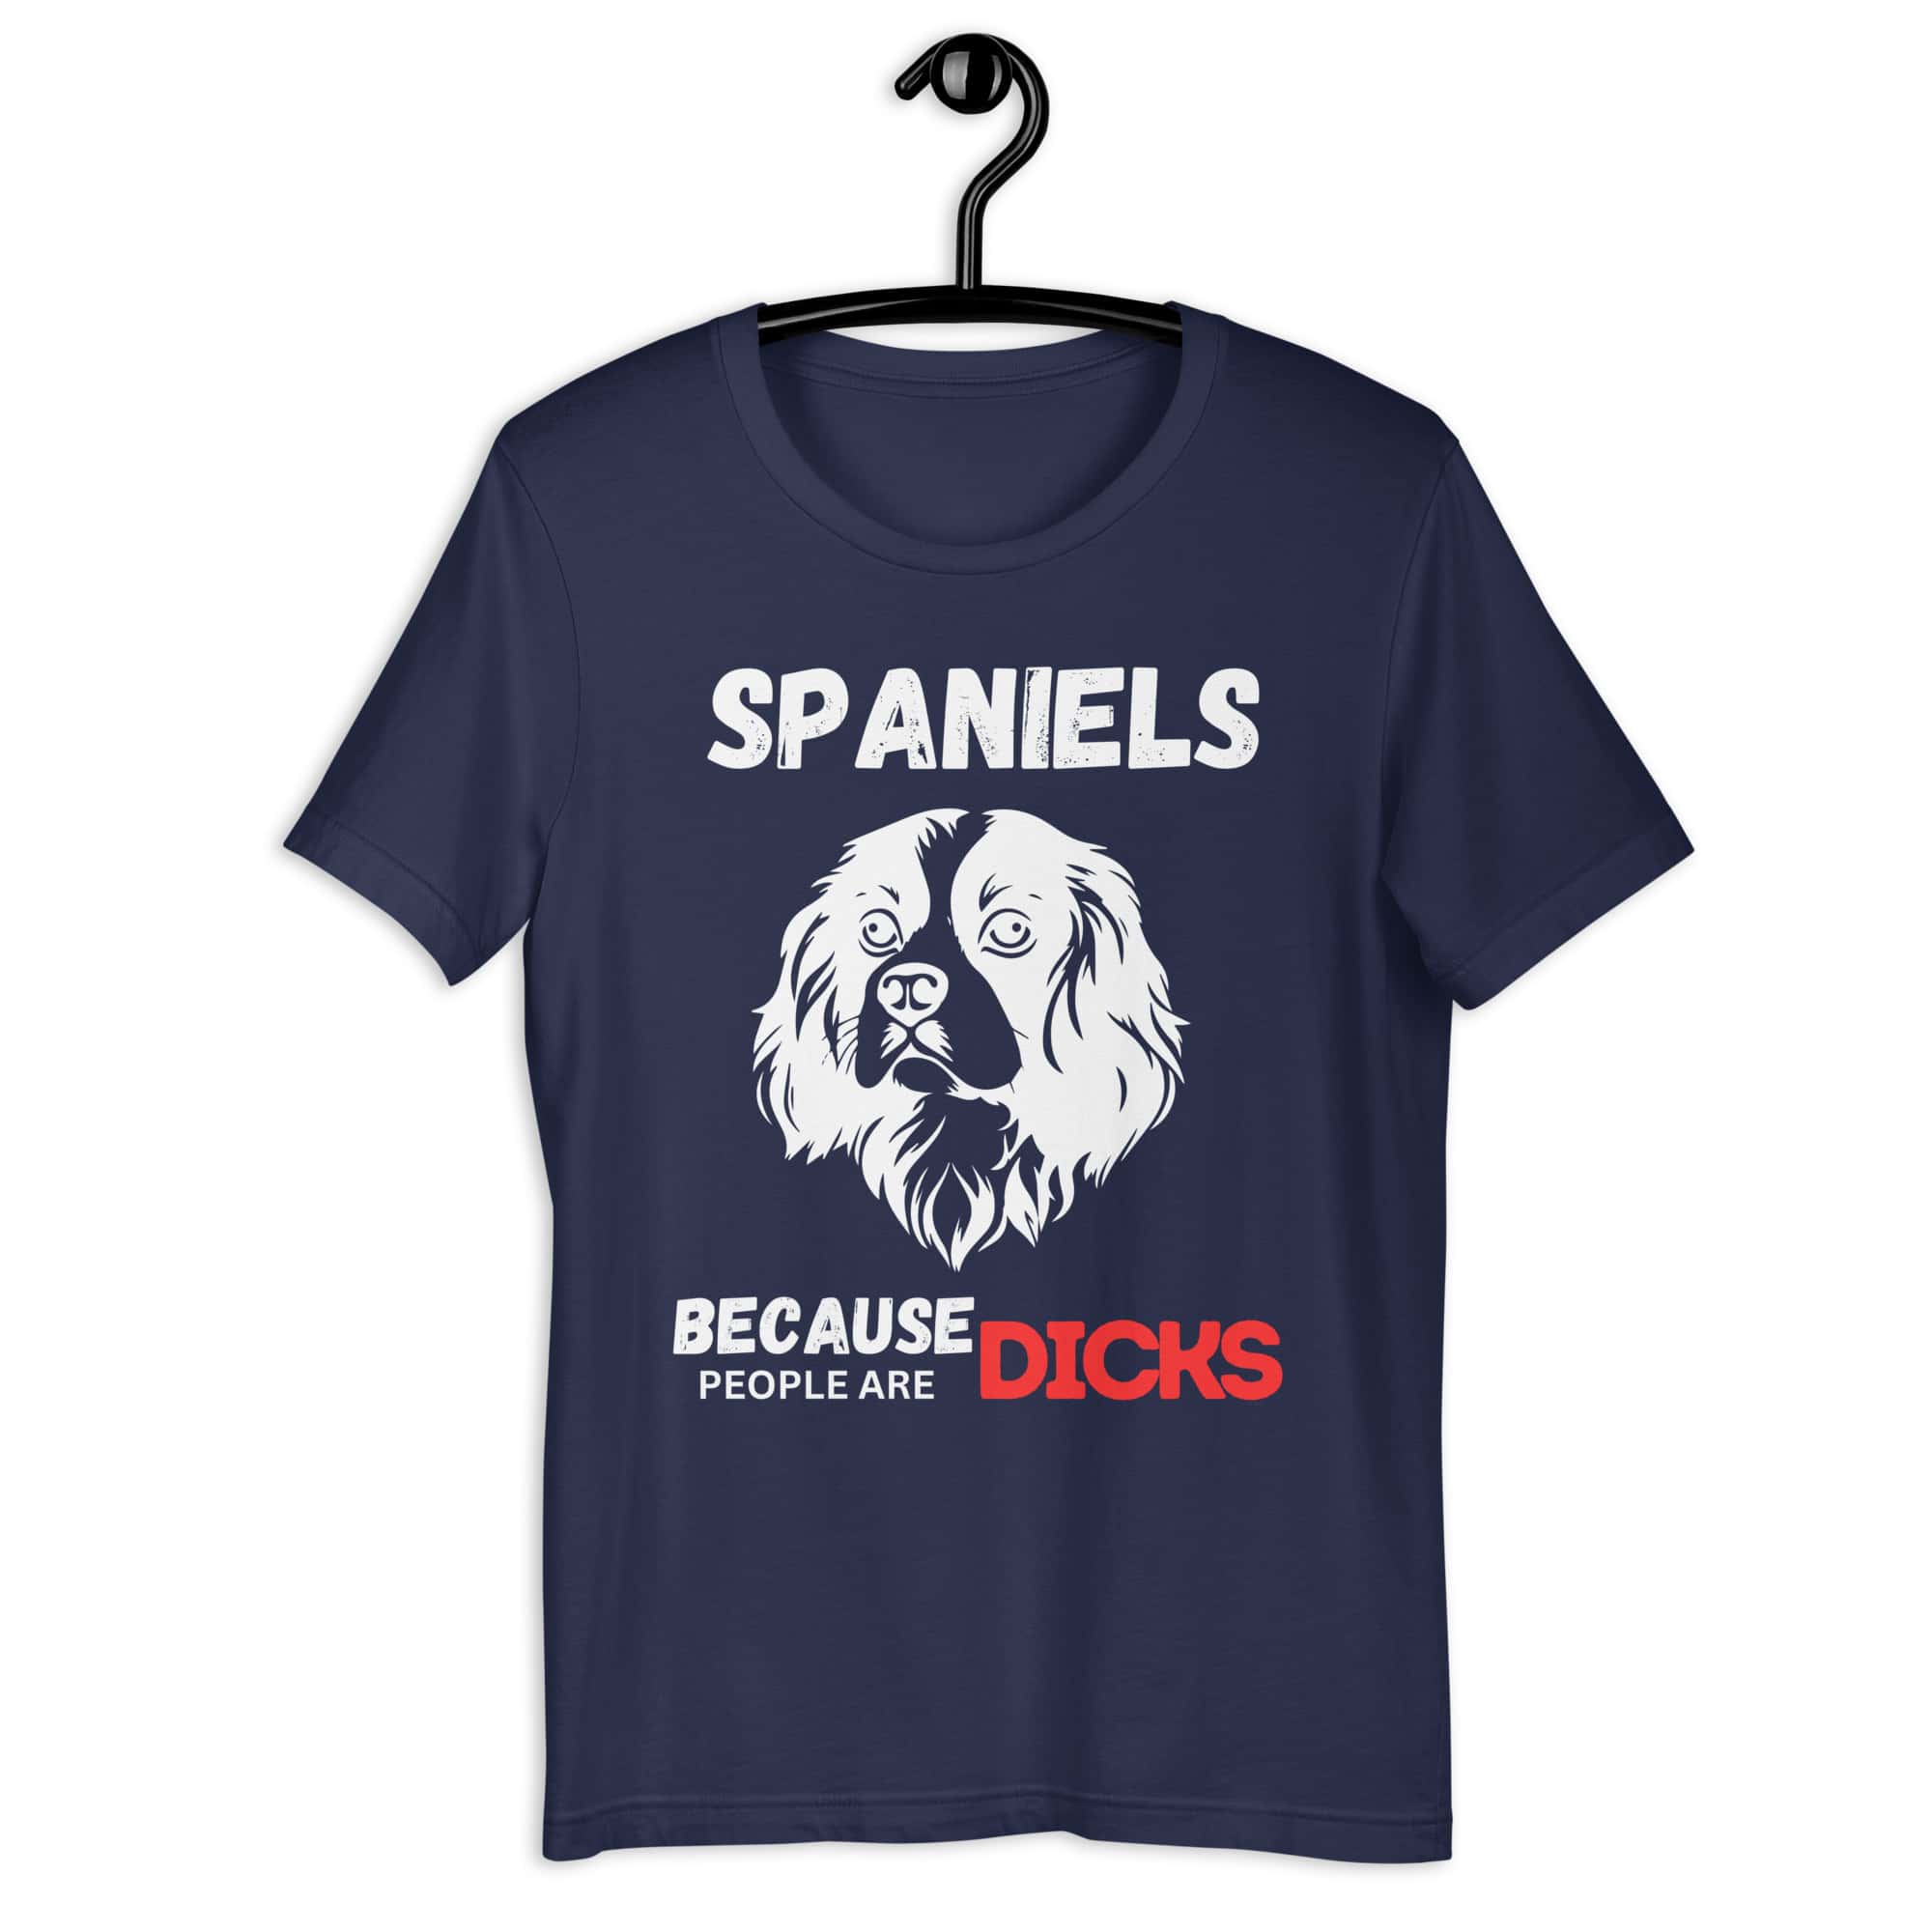 Spaniels Because People Are Dicks Unisex T-Shirt Navy